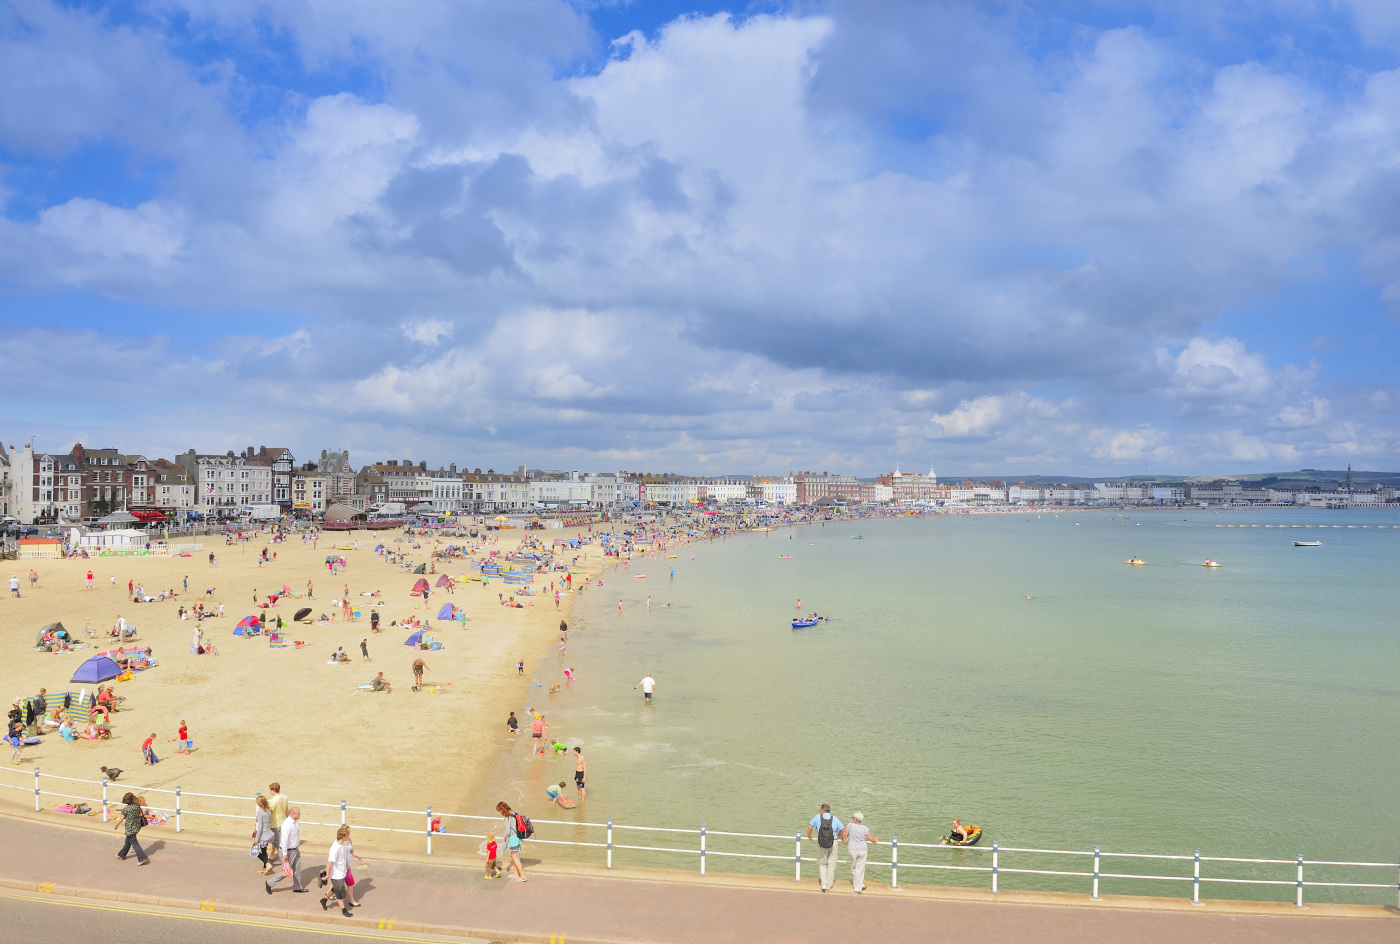 is weymouth worth a visit